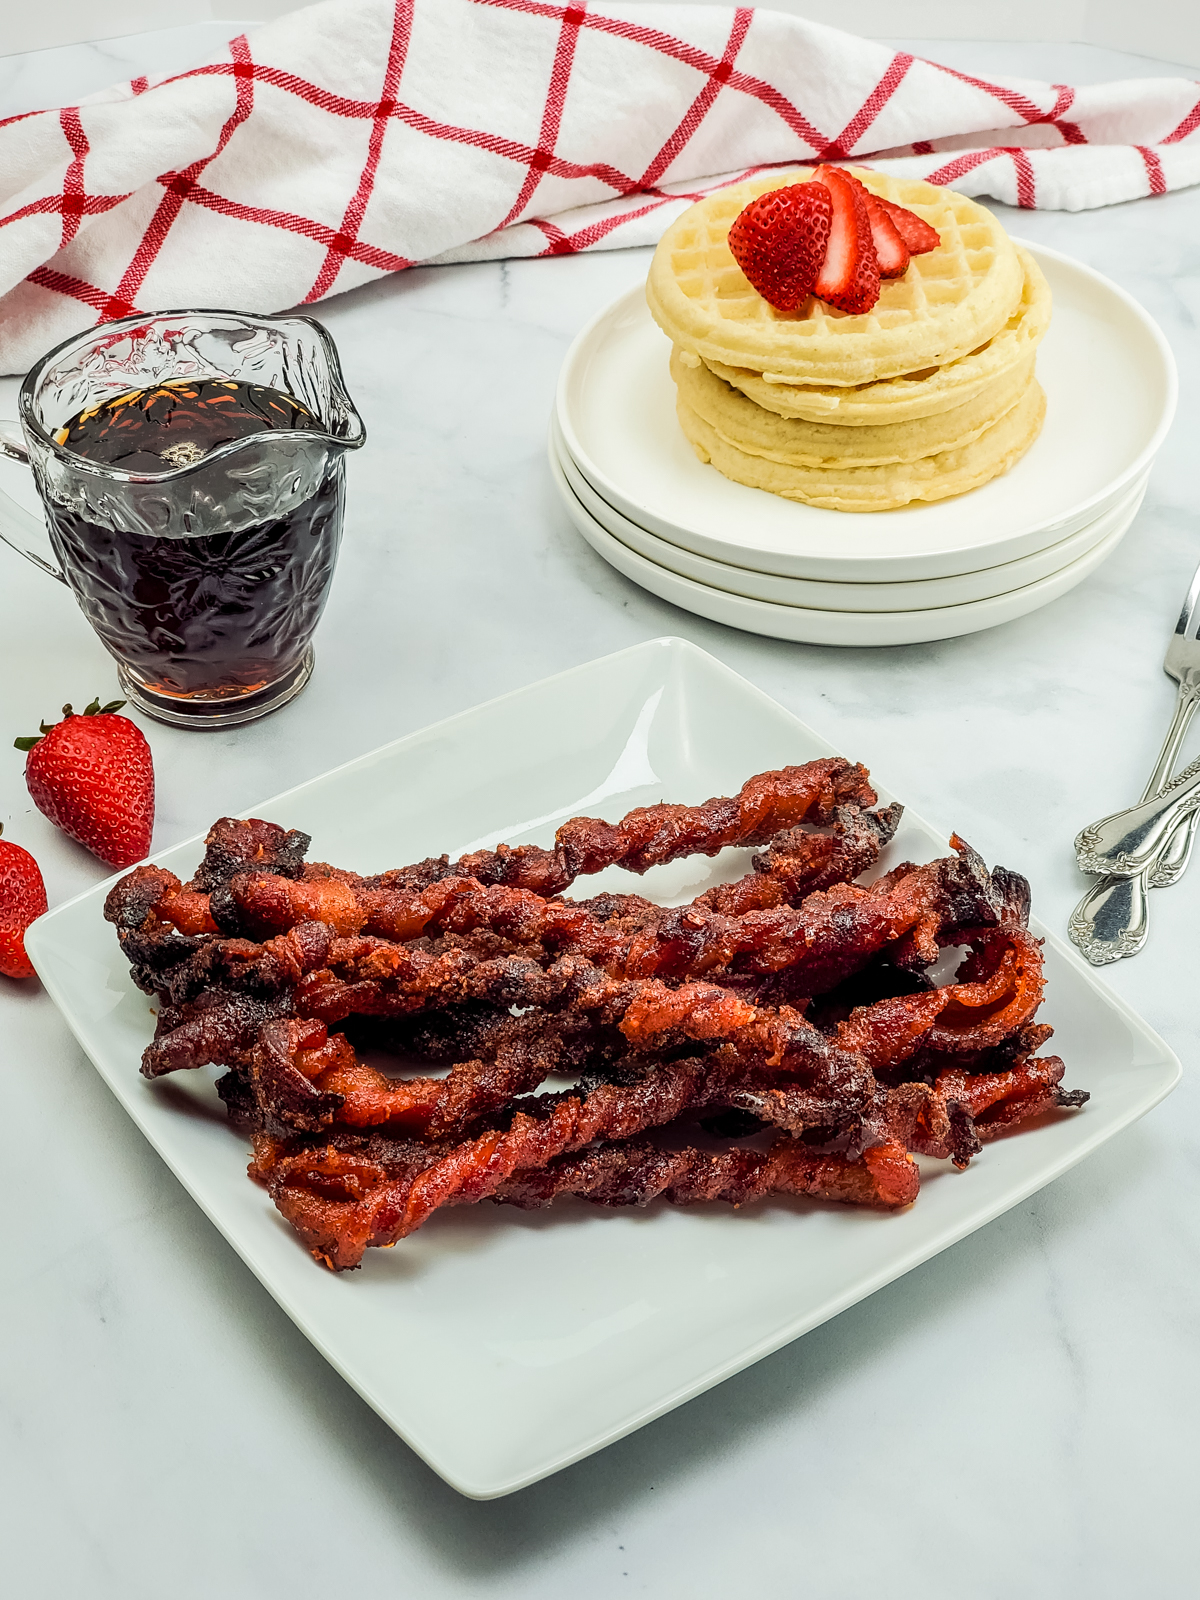 https://remakemyplate.com/wp-content/uploads/2022/06/Keto-twisted-bacon-2-of-3.jpg